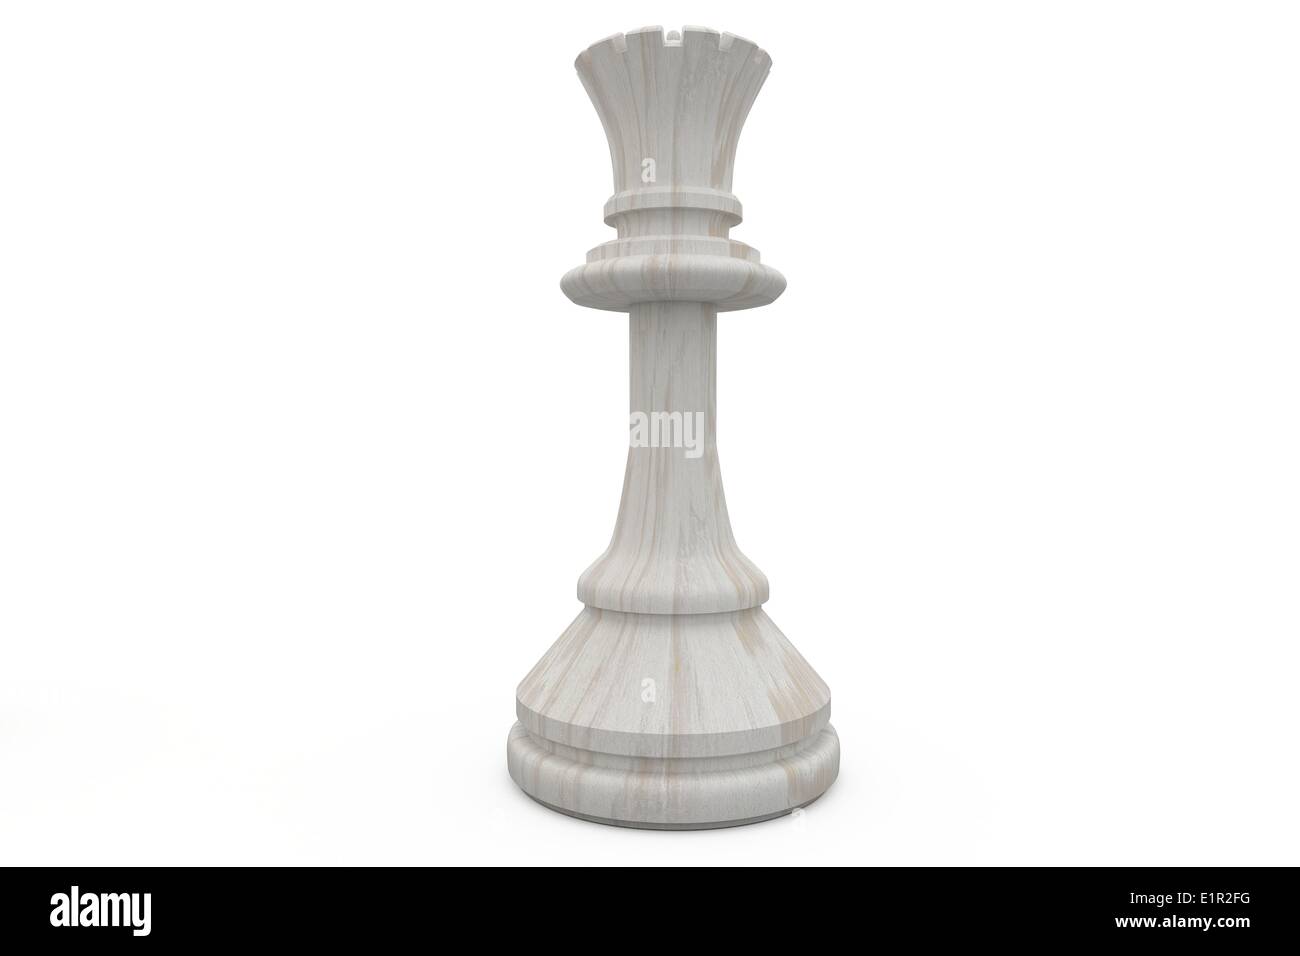 47+ Thousand Chess Rook Royalty-Free Images, Stock Photos